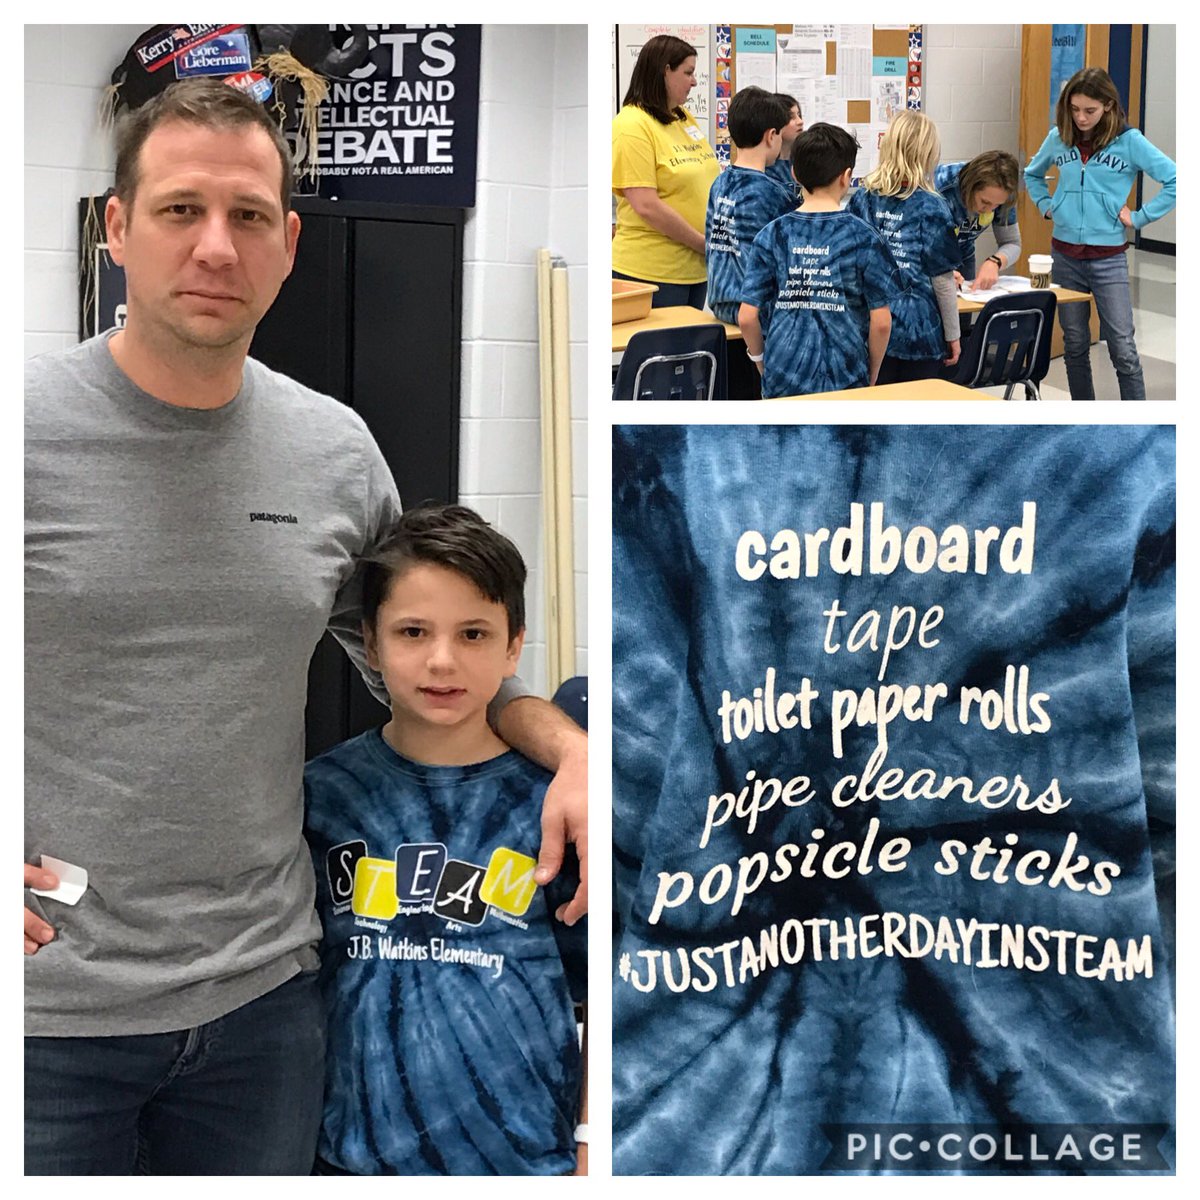 #grateful to @JBWatkinsES and @Lynne_Owen for including Jake on the #Coalminers #STEAM team for today’s STEAMmania with @ccpsinfo